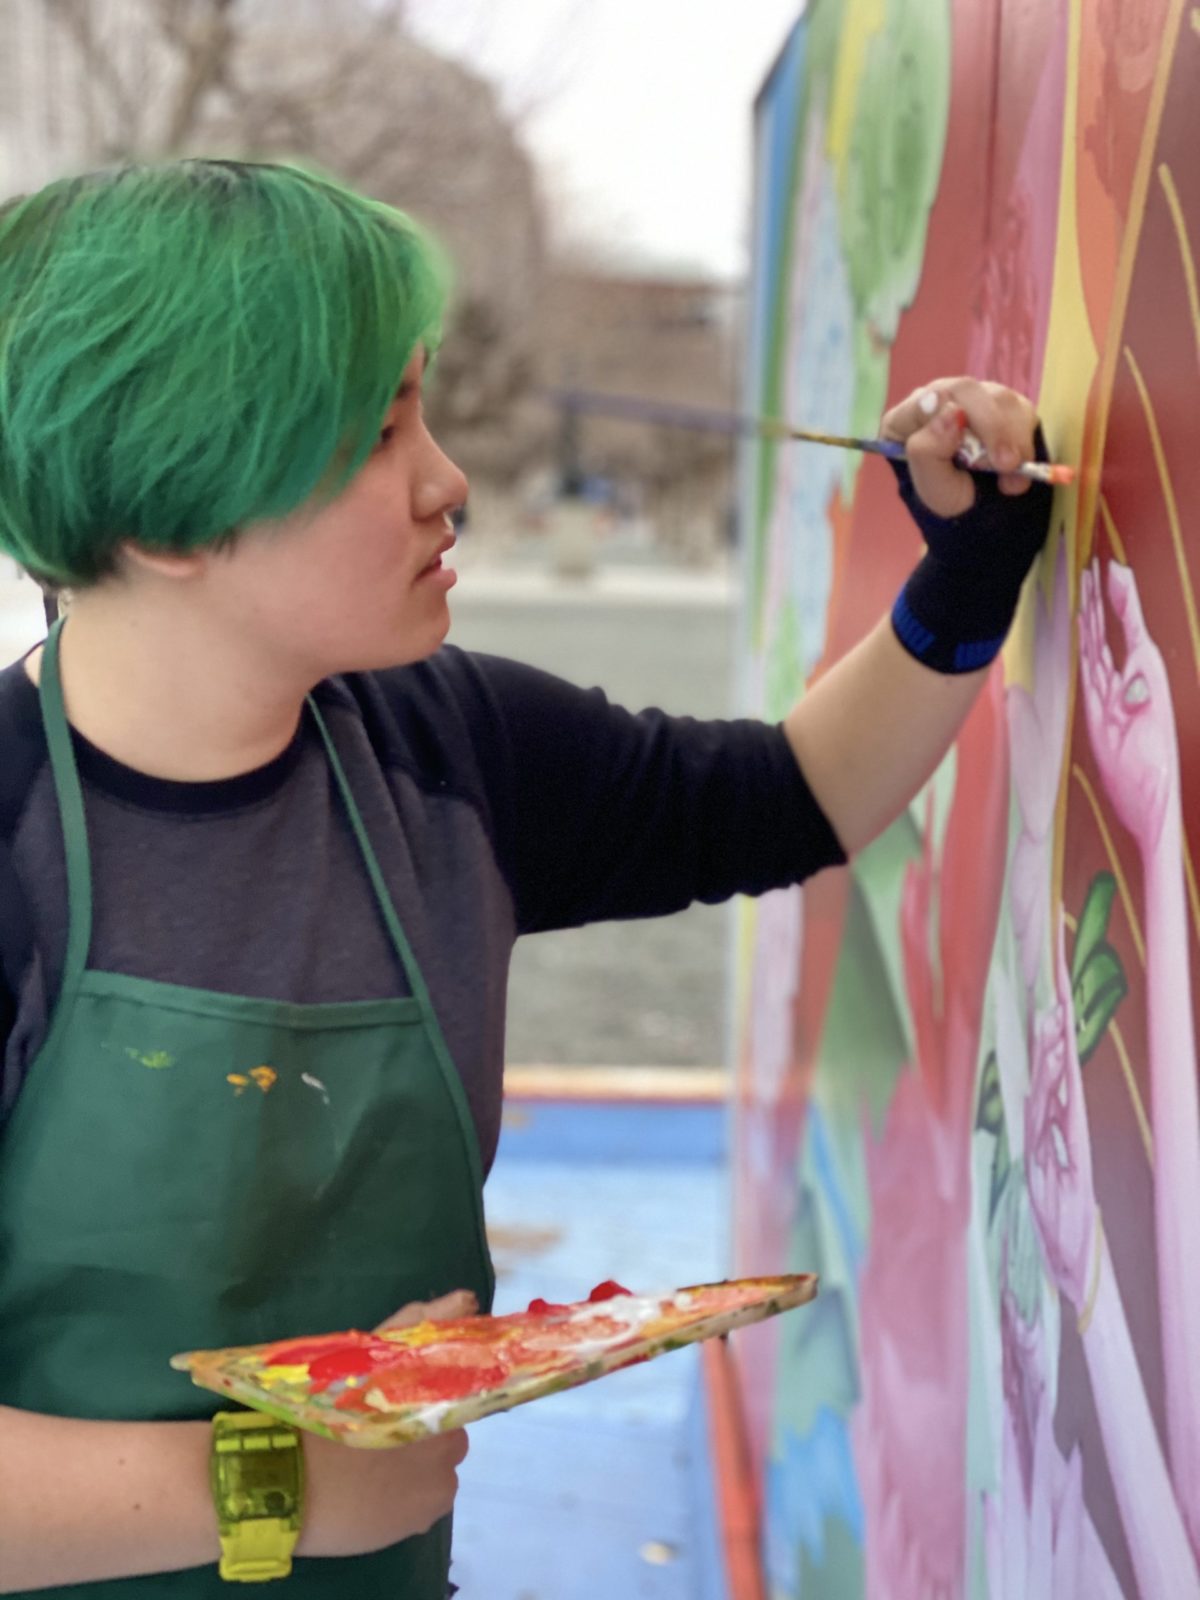 An artist with short green hair paints a colorful mural.